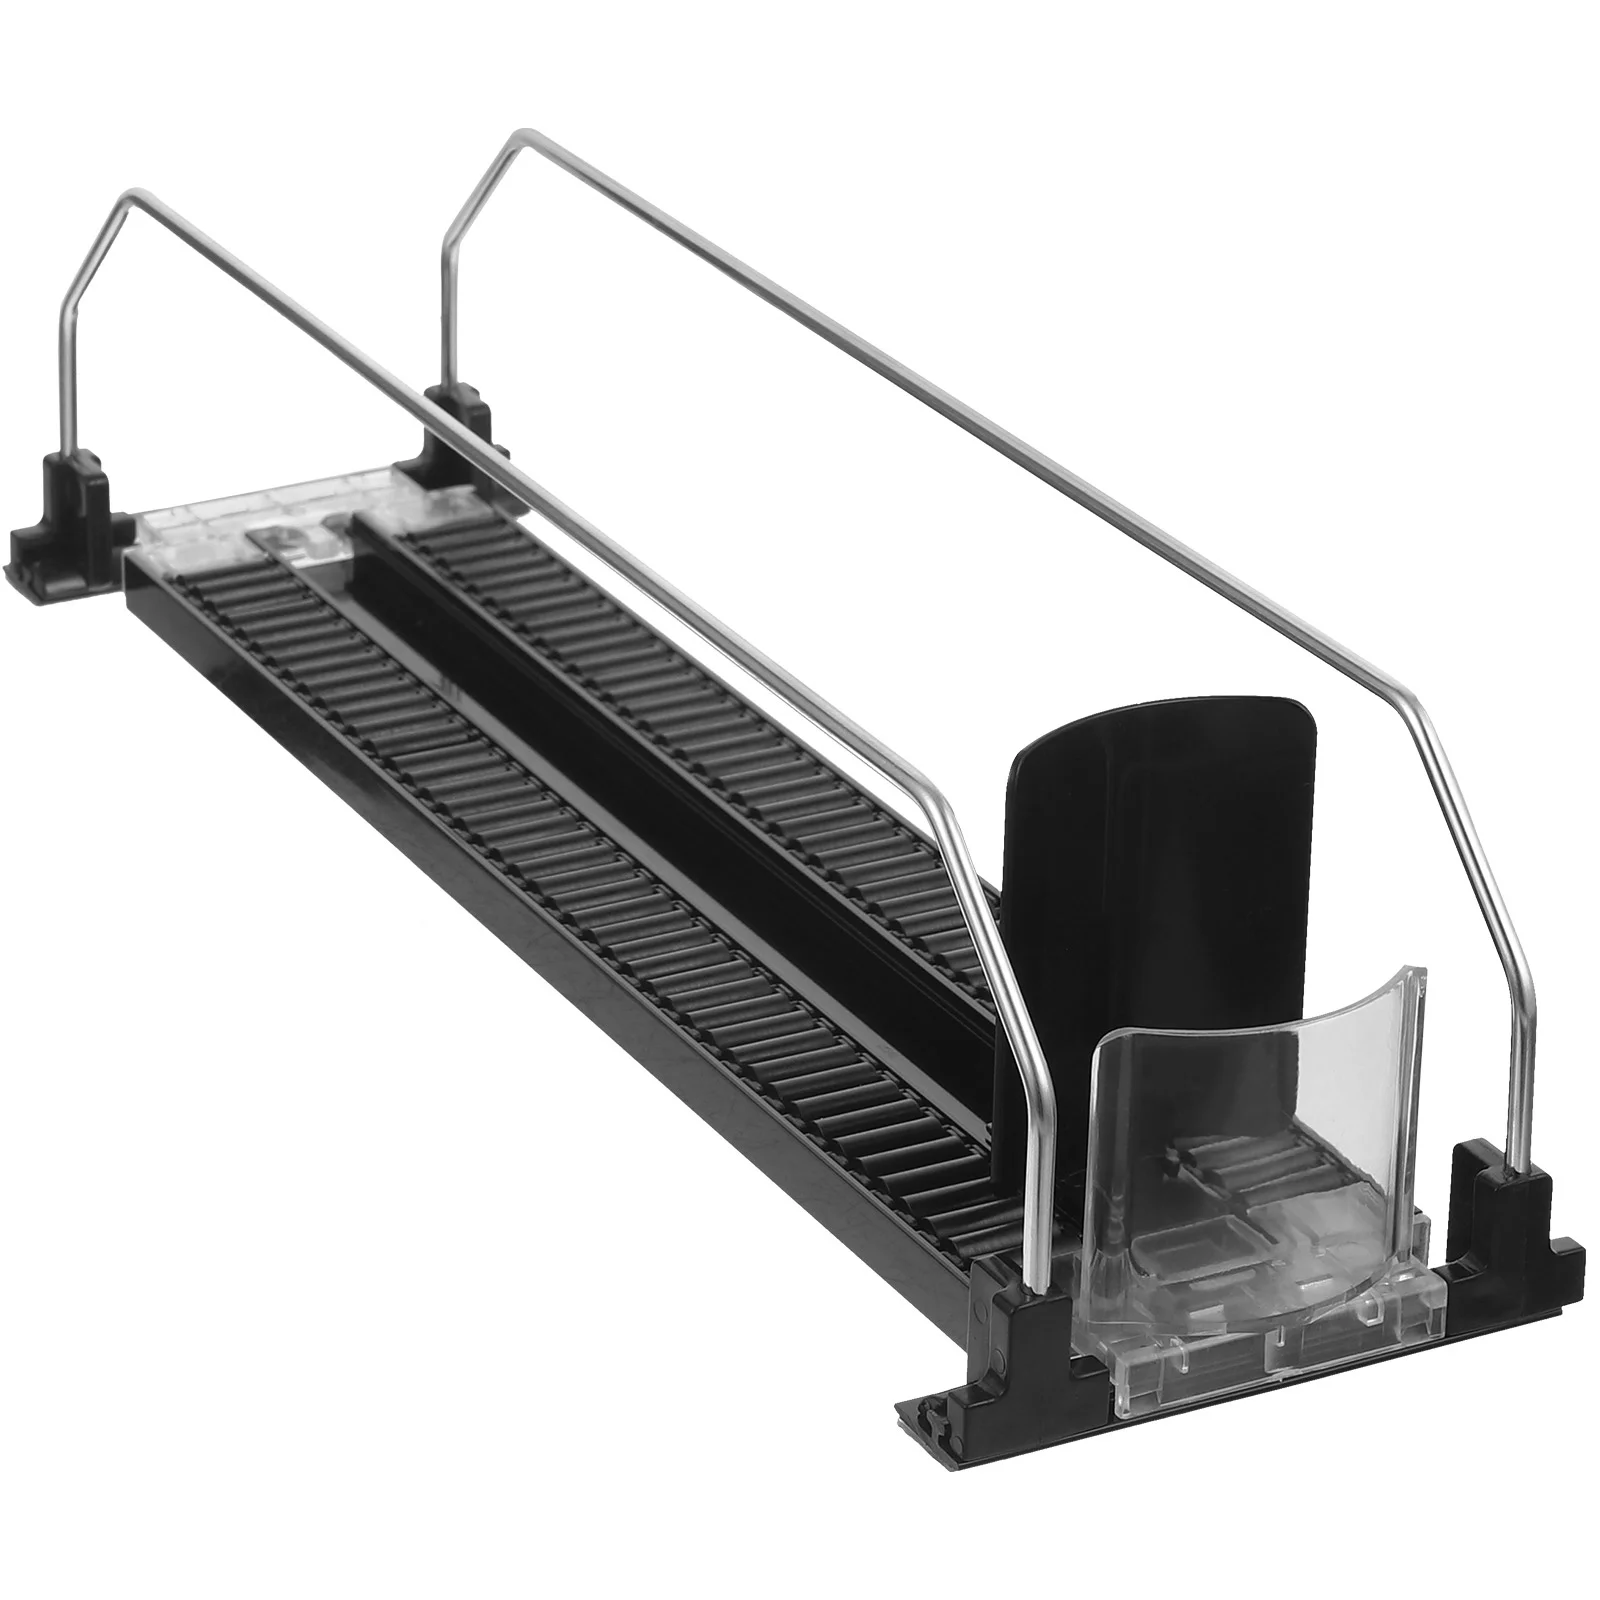 

Shelf Automatic Replenishment Pusher Refill Sliding System for Drinks Display Easy and convenient to install and use